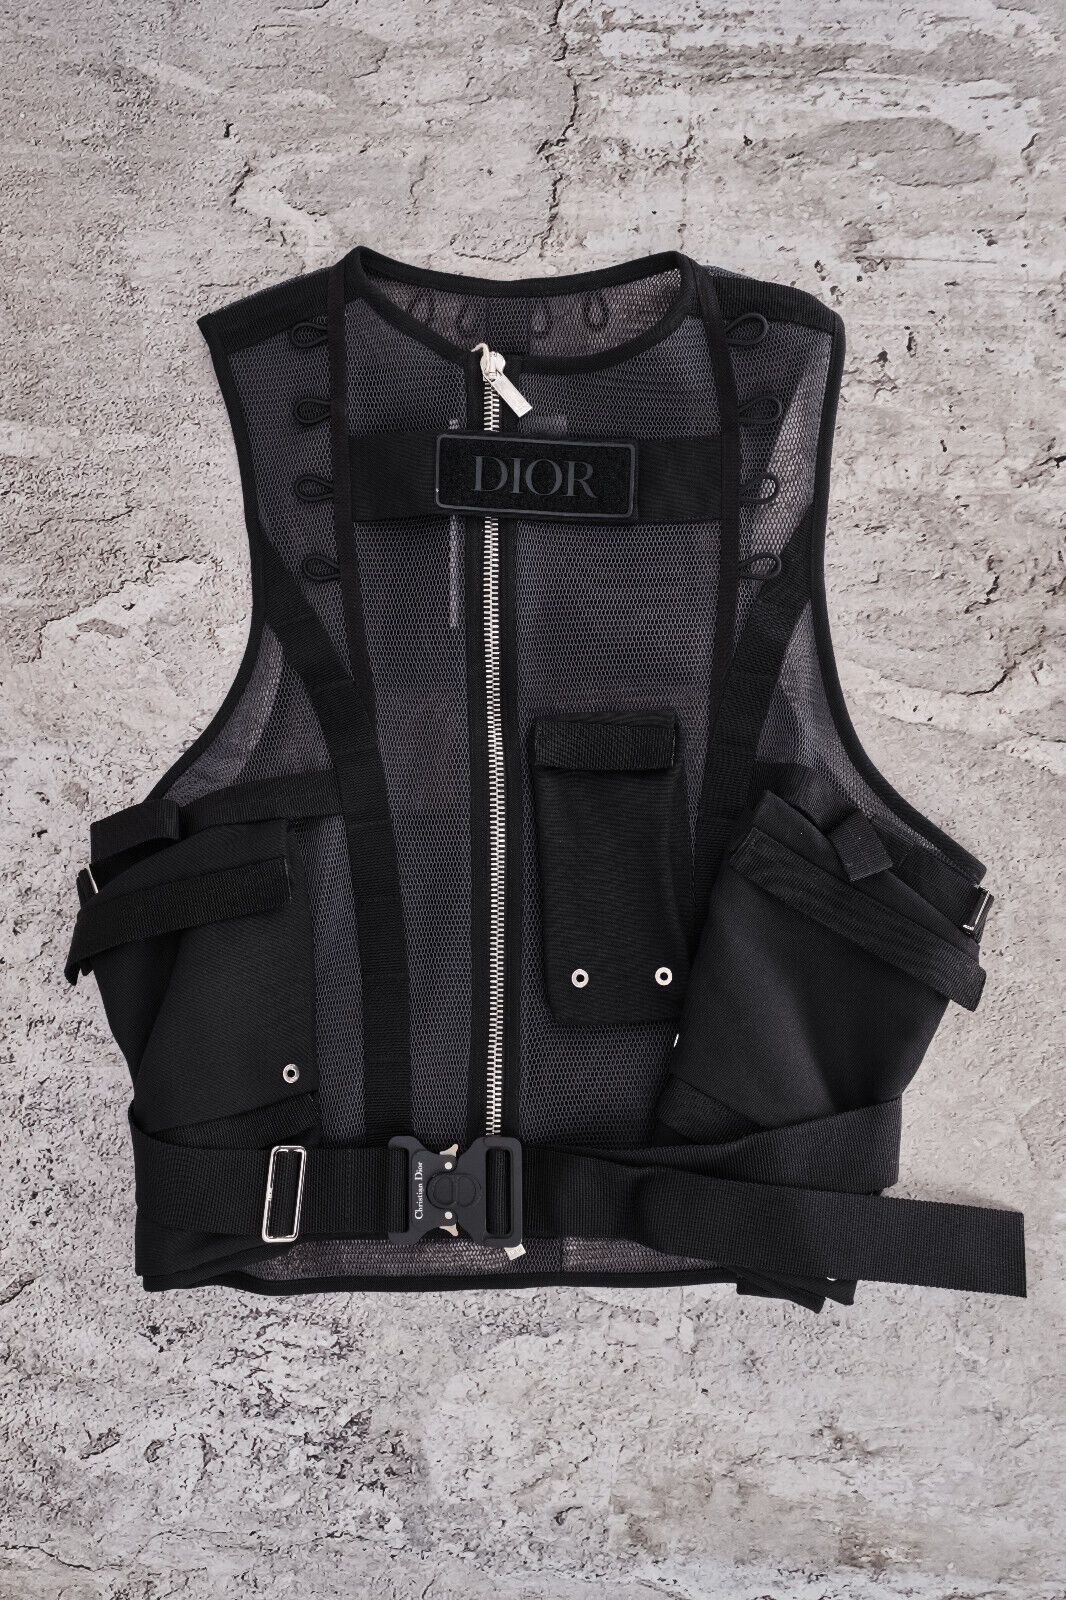 Dior BNWT DIOR BLACK ICONIC TACTICAL VEST WITH ALYX PATCH 50IT